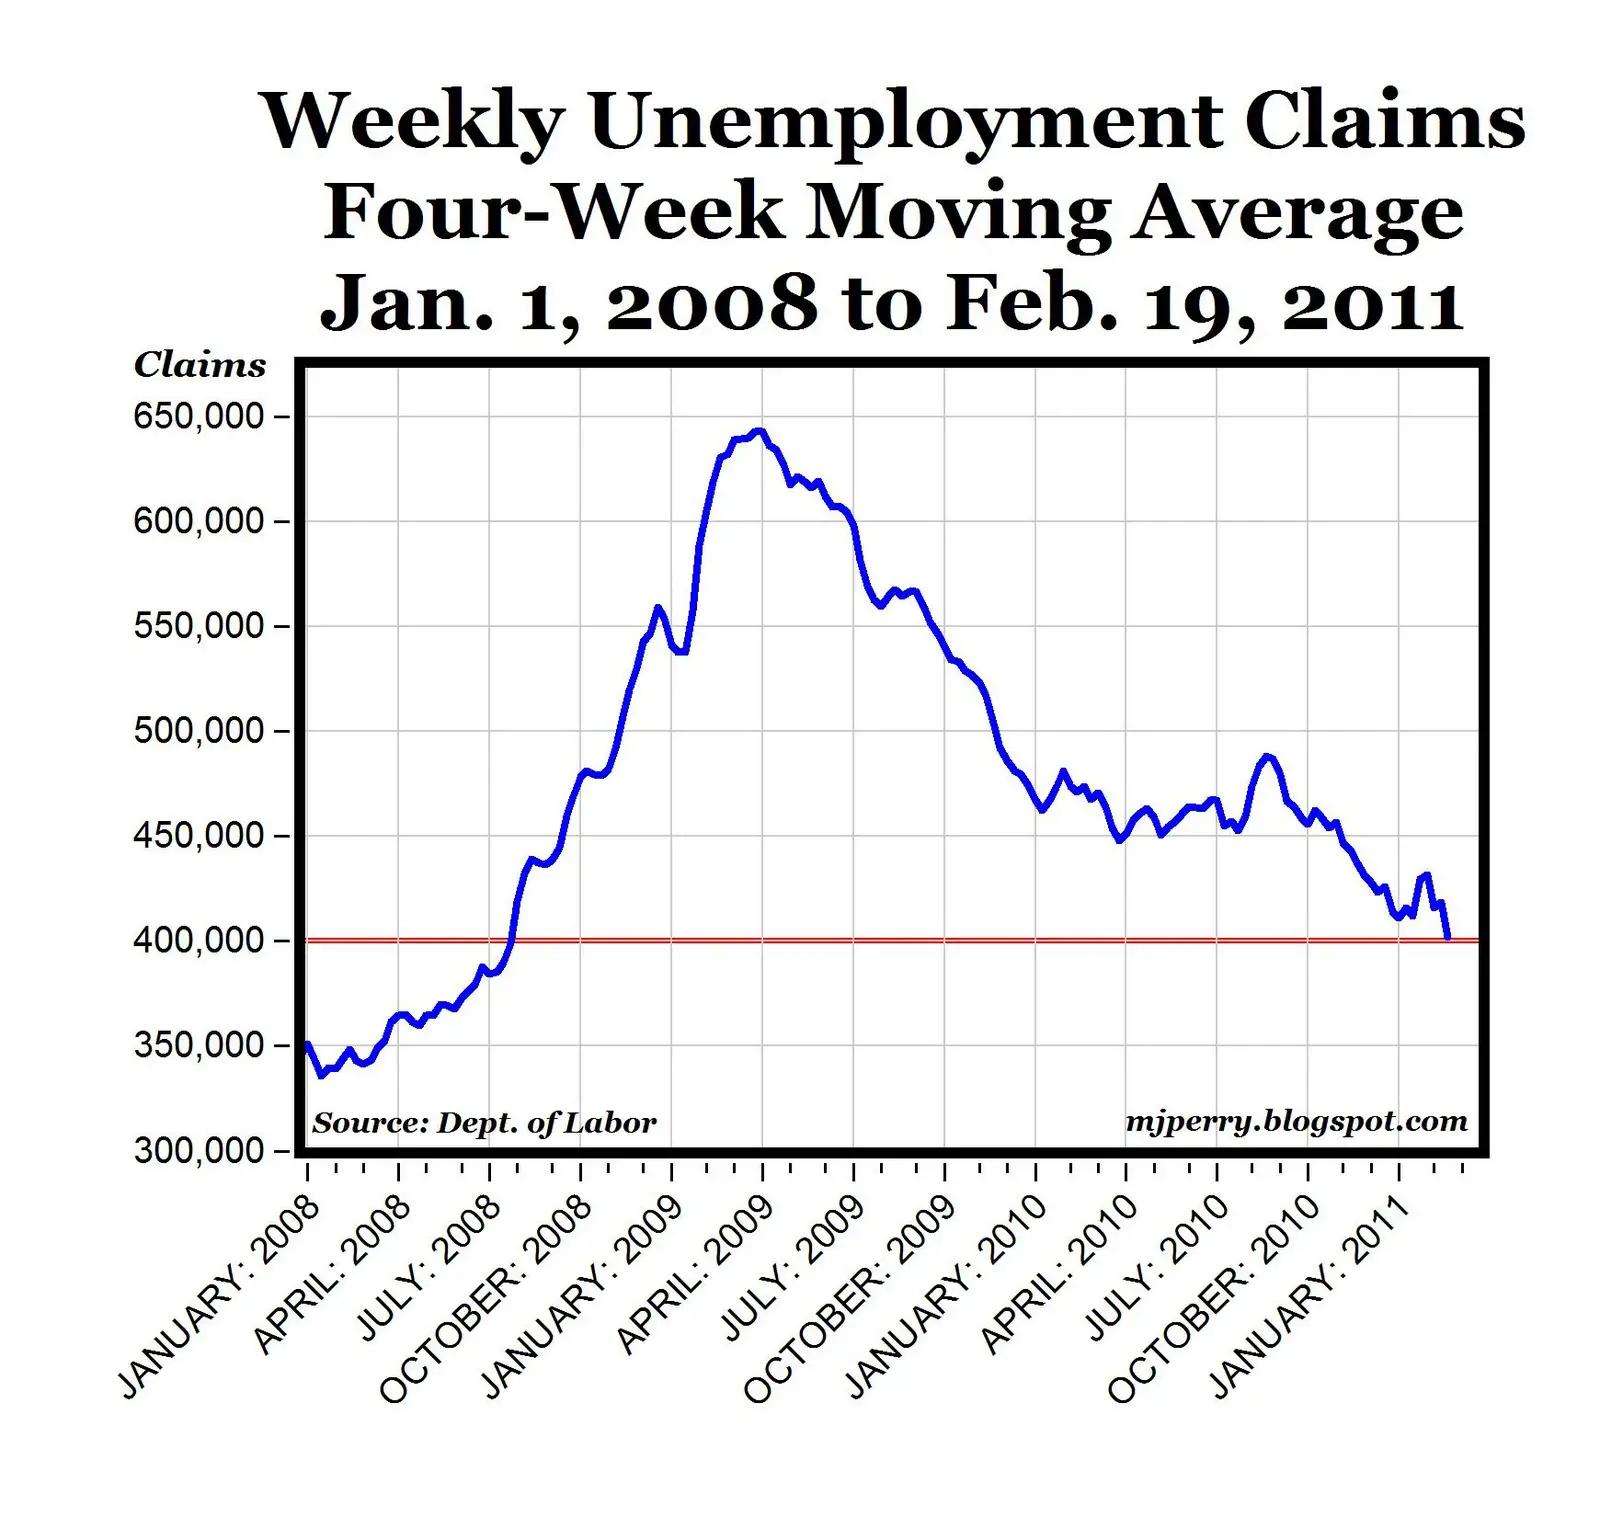 CARPE DIEM: Jobless Claims Fall to Lowest Level Since July 2008